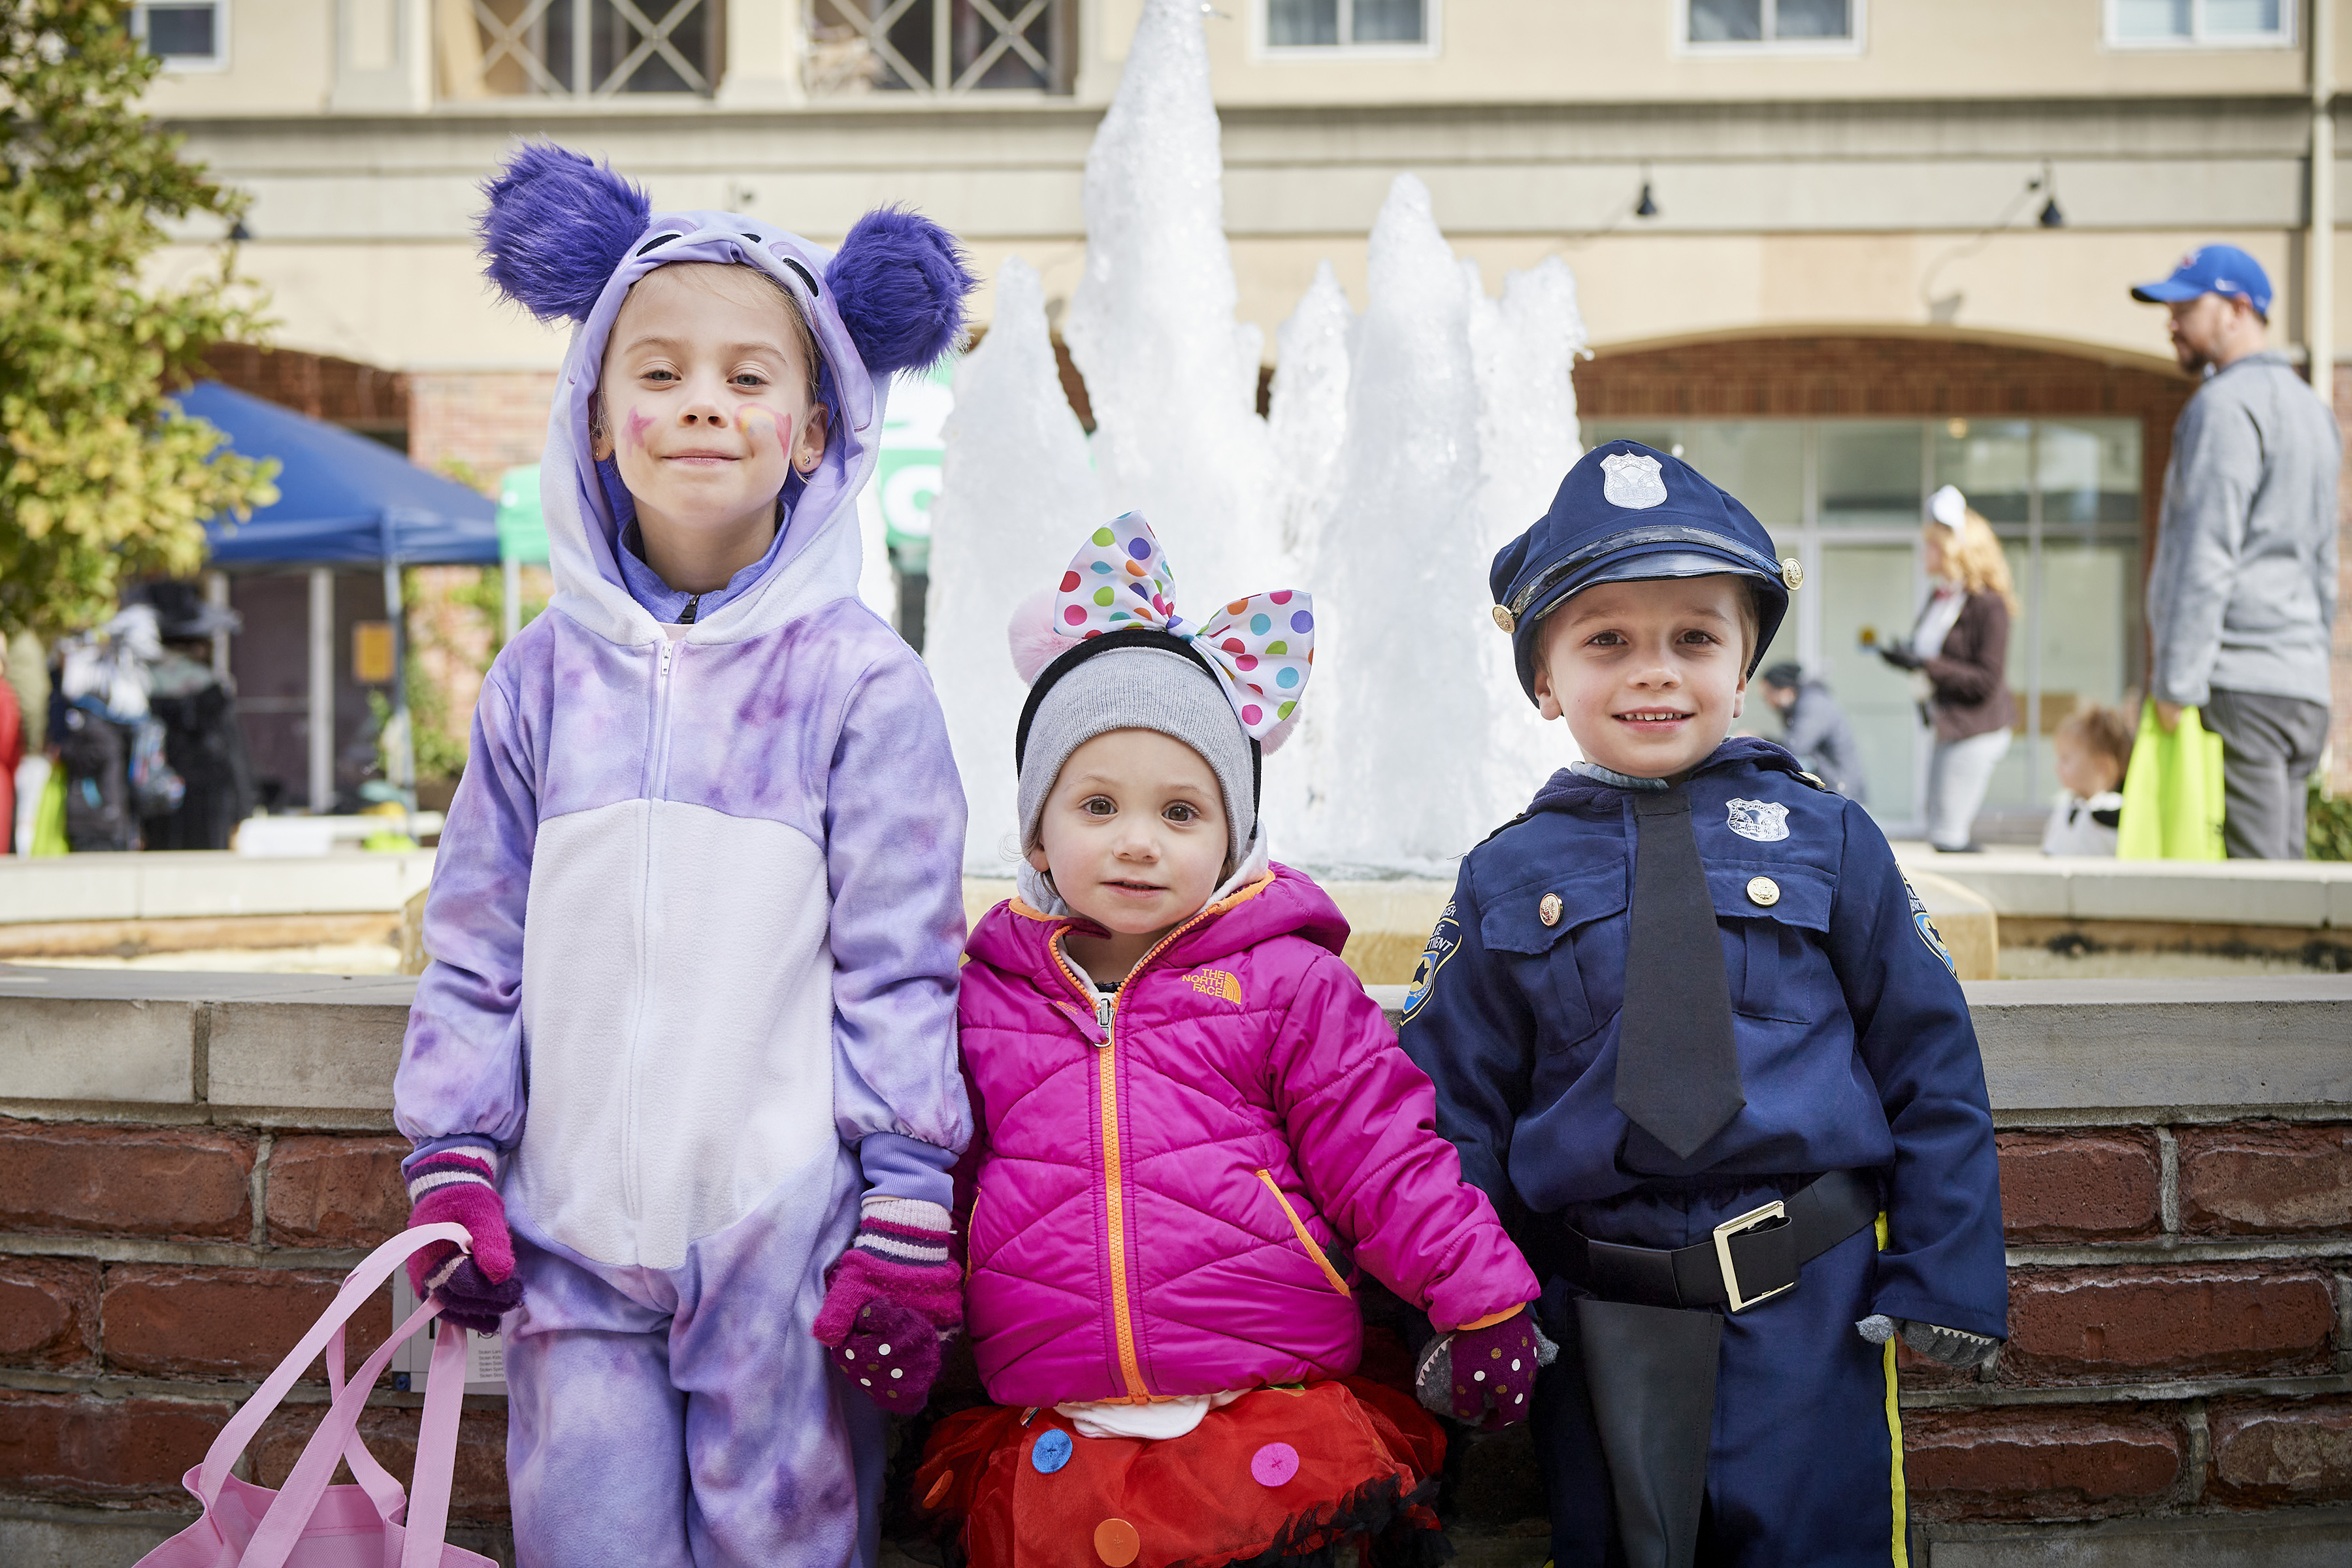 Kids dressed up for Halloween in Harmony Square holding treat bags